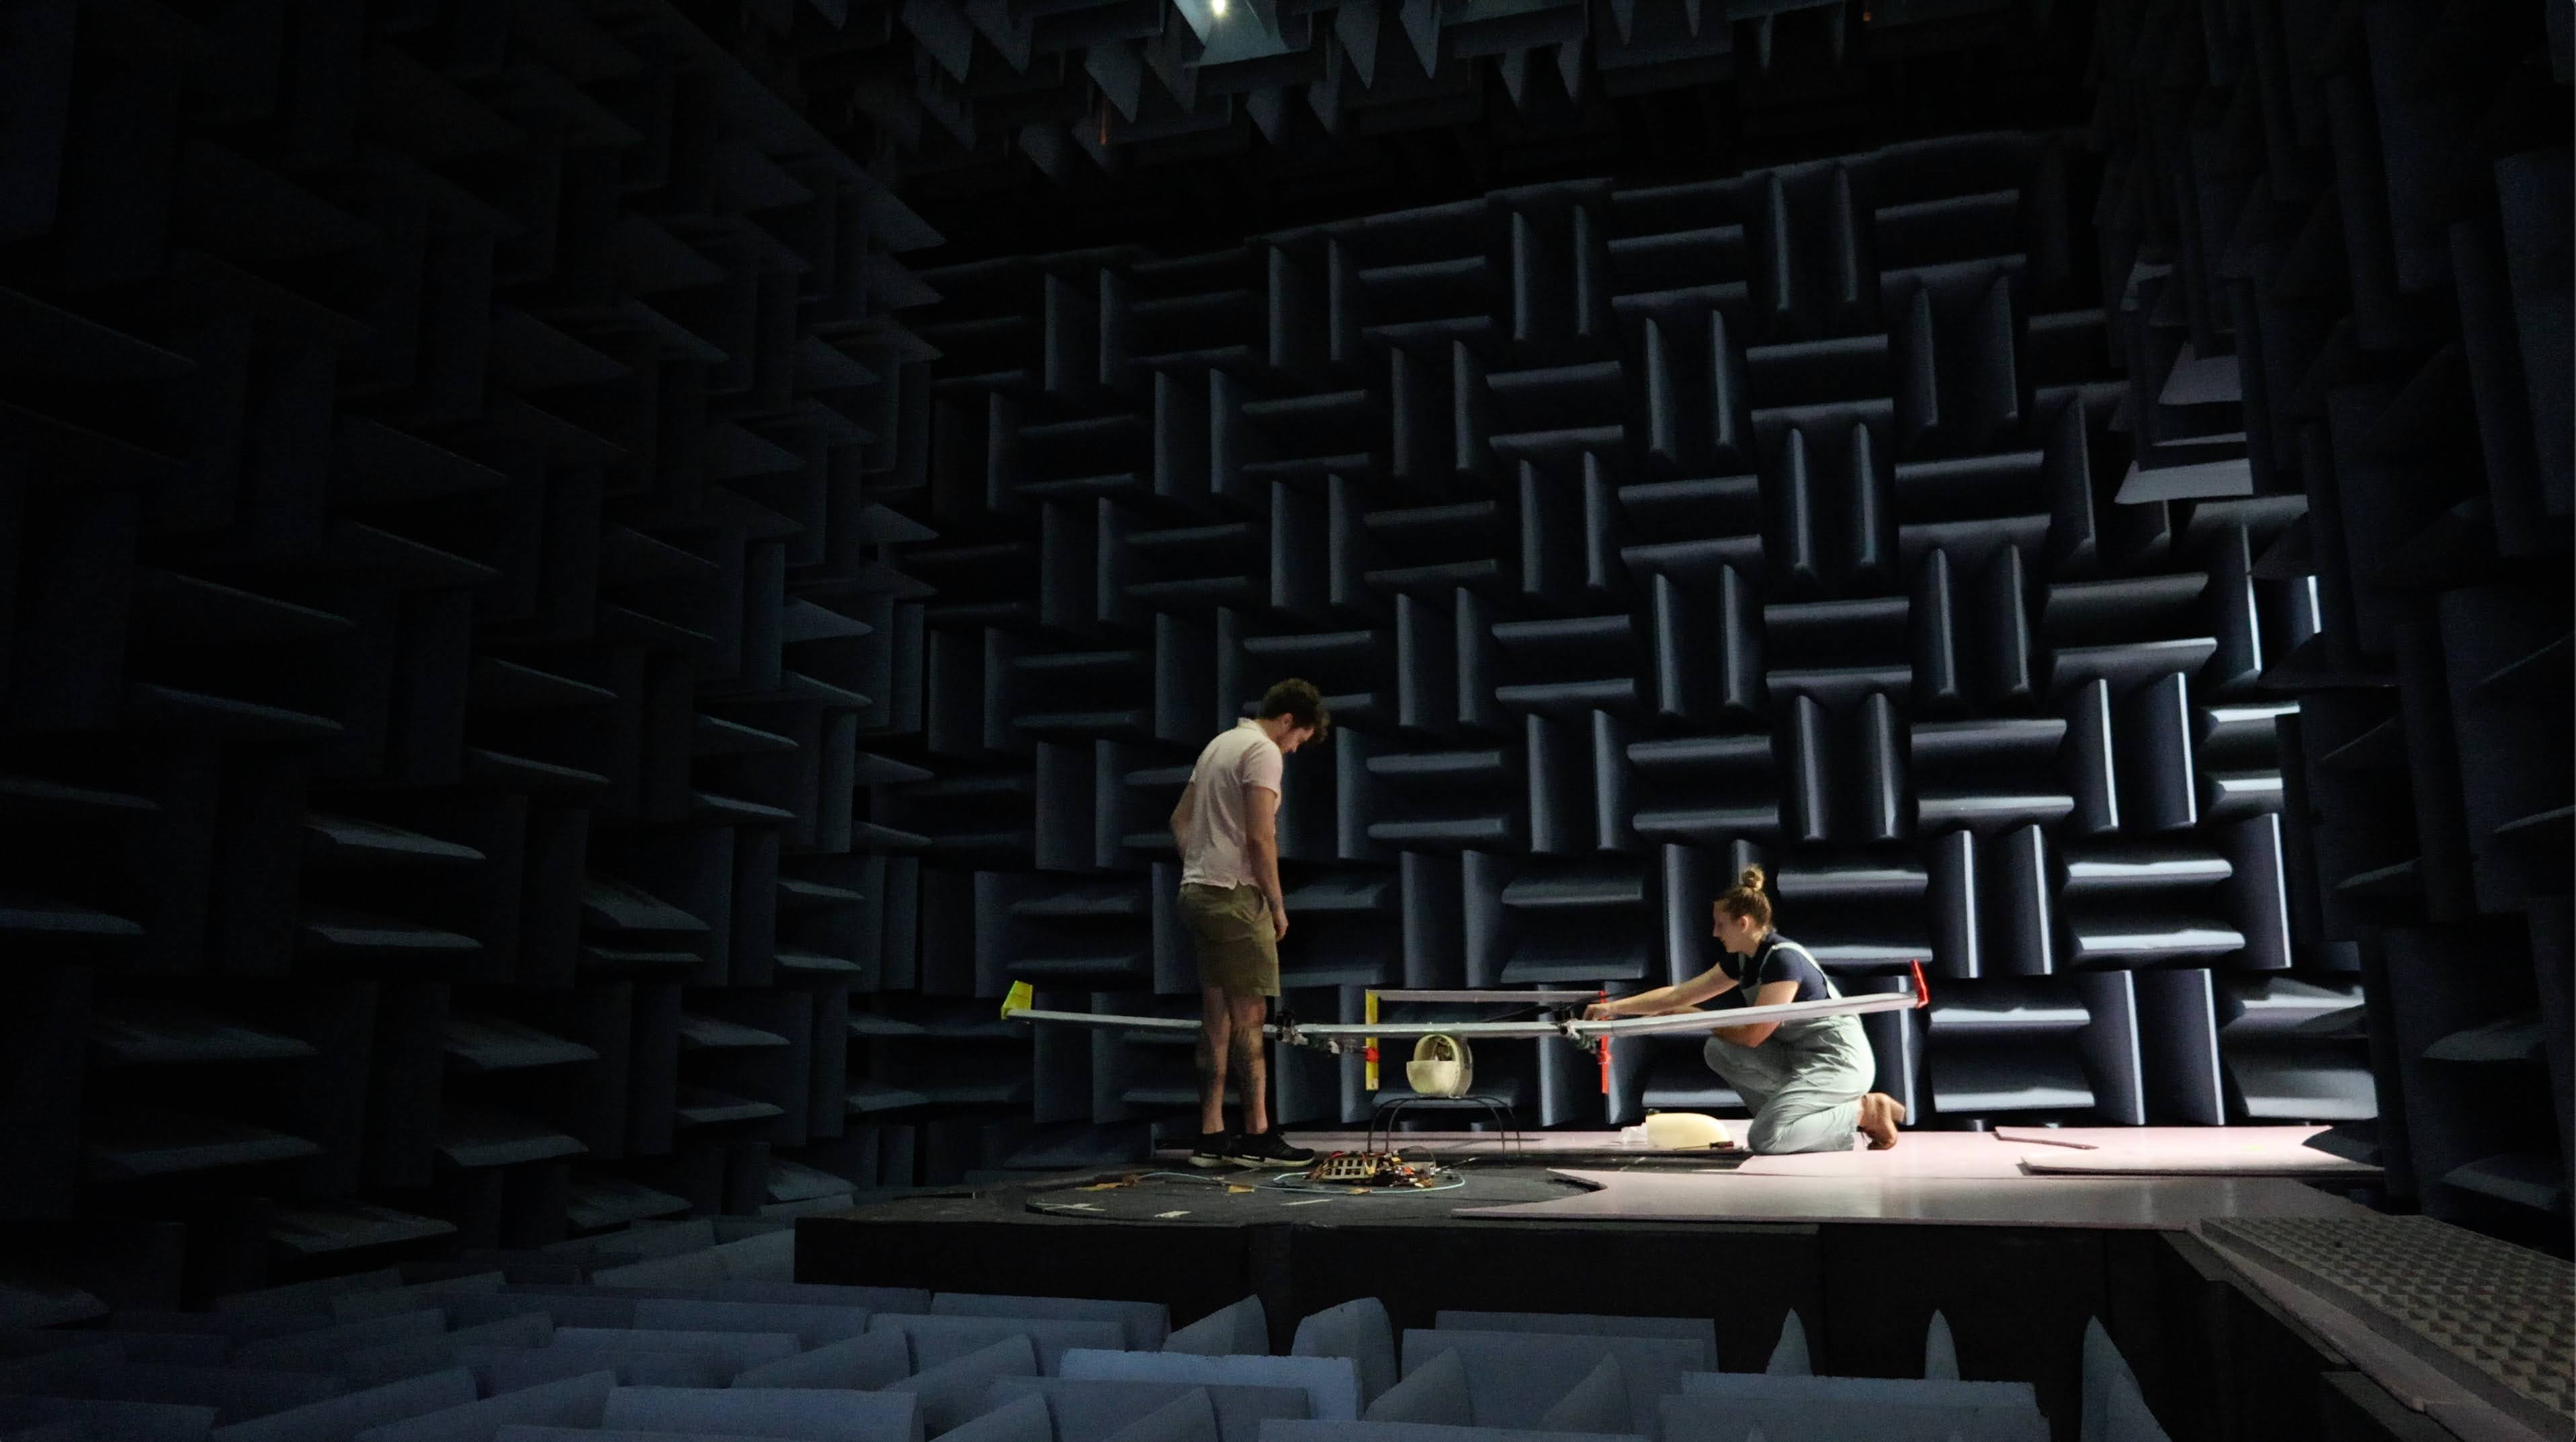 Aaron McKinnis and Anastasia Byrd work on an aircraft in an Anechoic Chamber